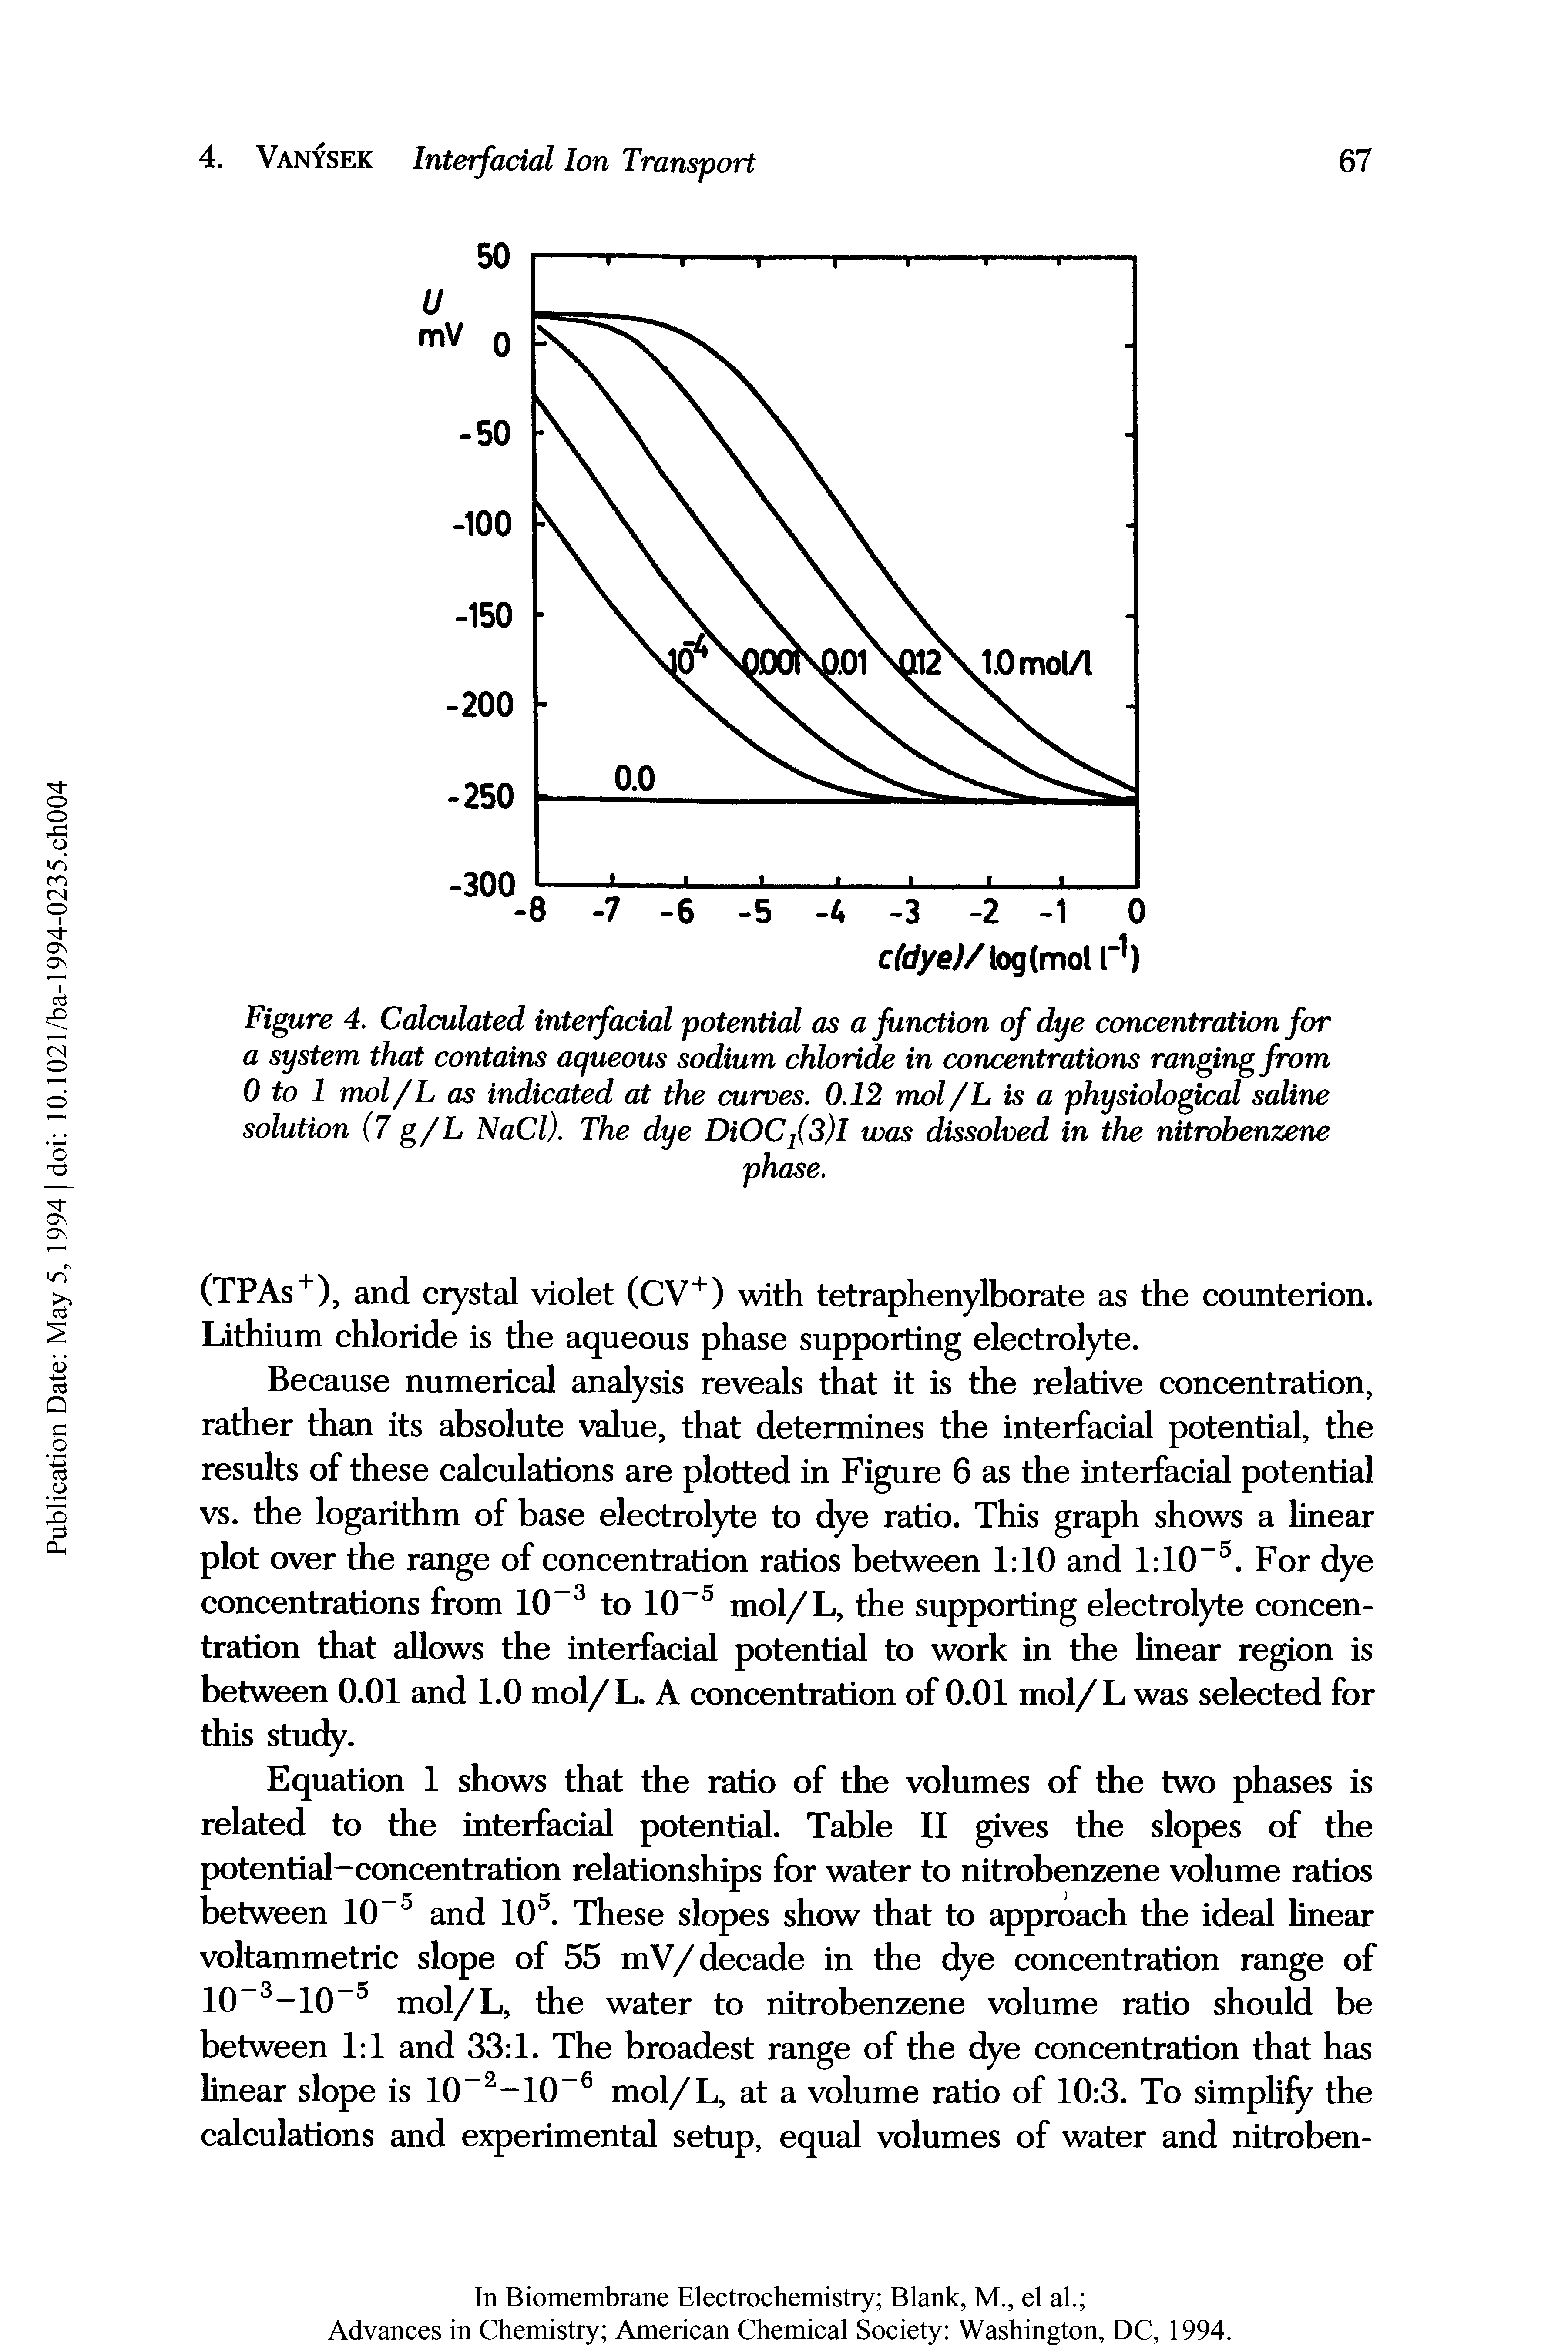 Figure 4. Calculated interfacial potential as a function of dye concentration for a system that contains aqueous sodium chloride in concentrations ranging from 0 to 1 mol/L as indicated at the curves. 0.12 mol/L is a physiological saline solution (7 g/L NaCl). The dye DiOC2(3)1 was dissolved in the nitrobenzene...